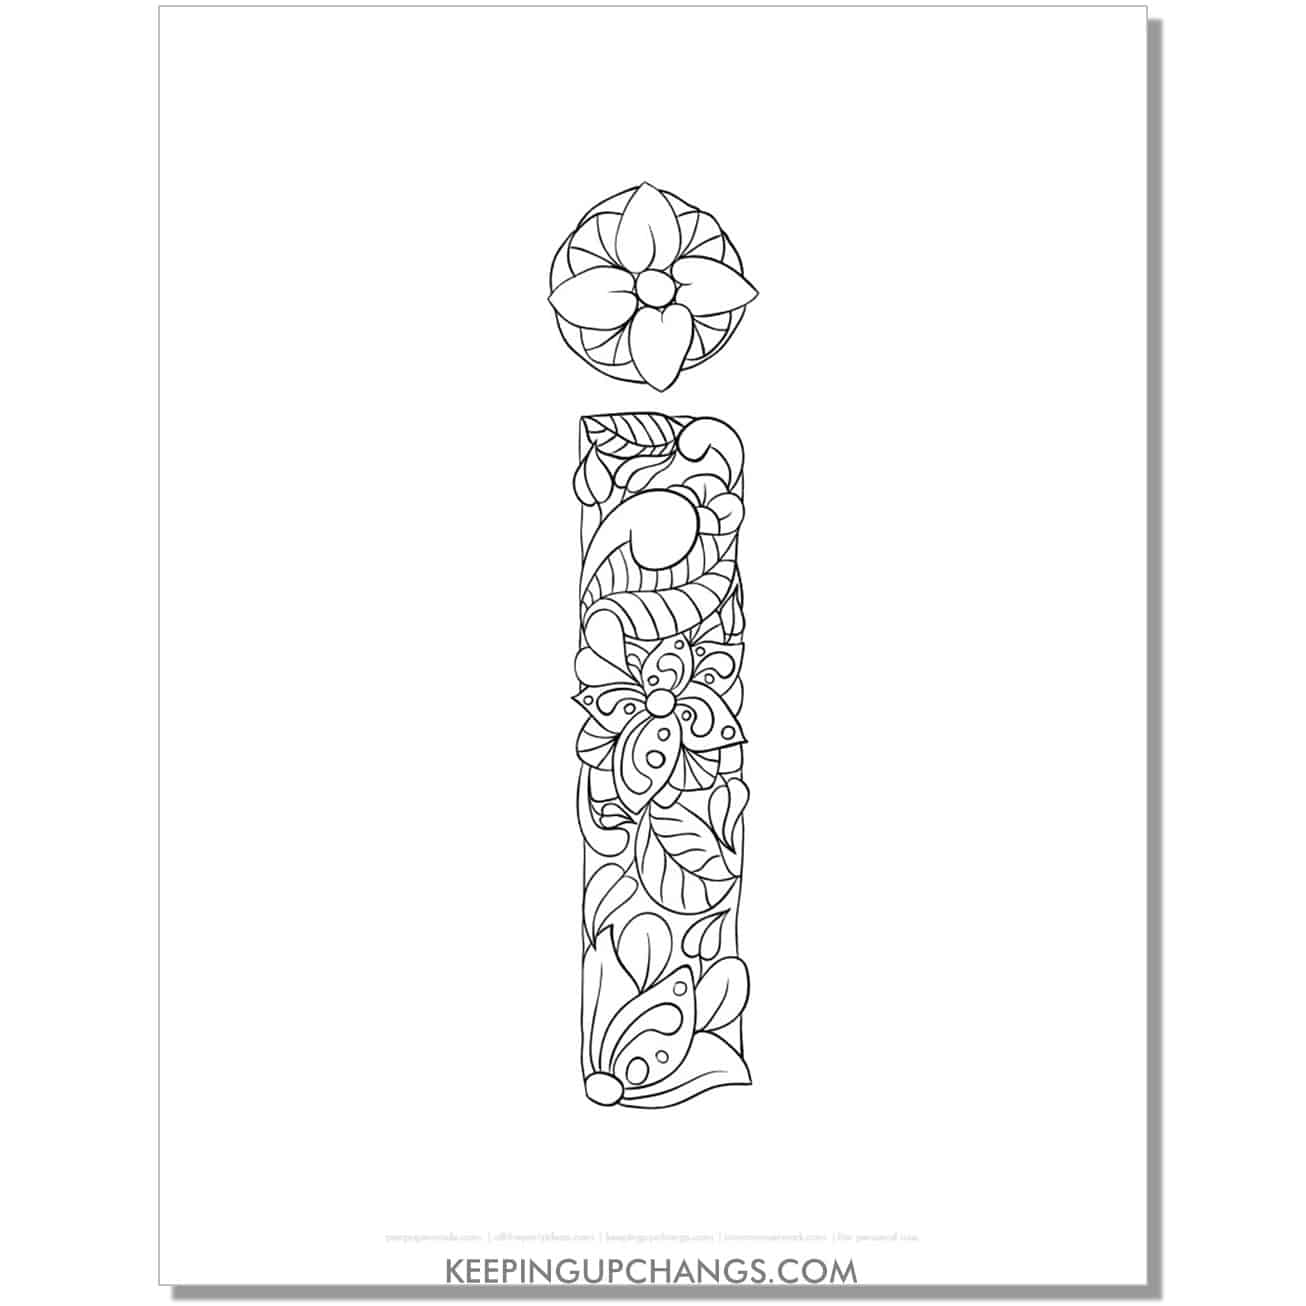 free abc i to color, complicated mandala zentangle for adults.